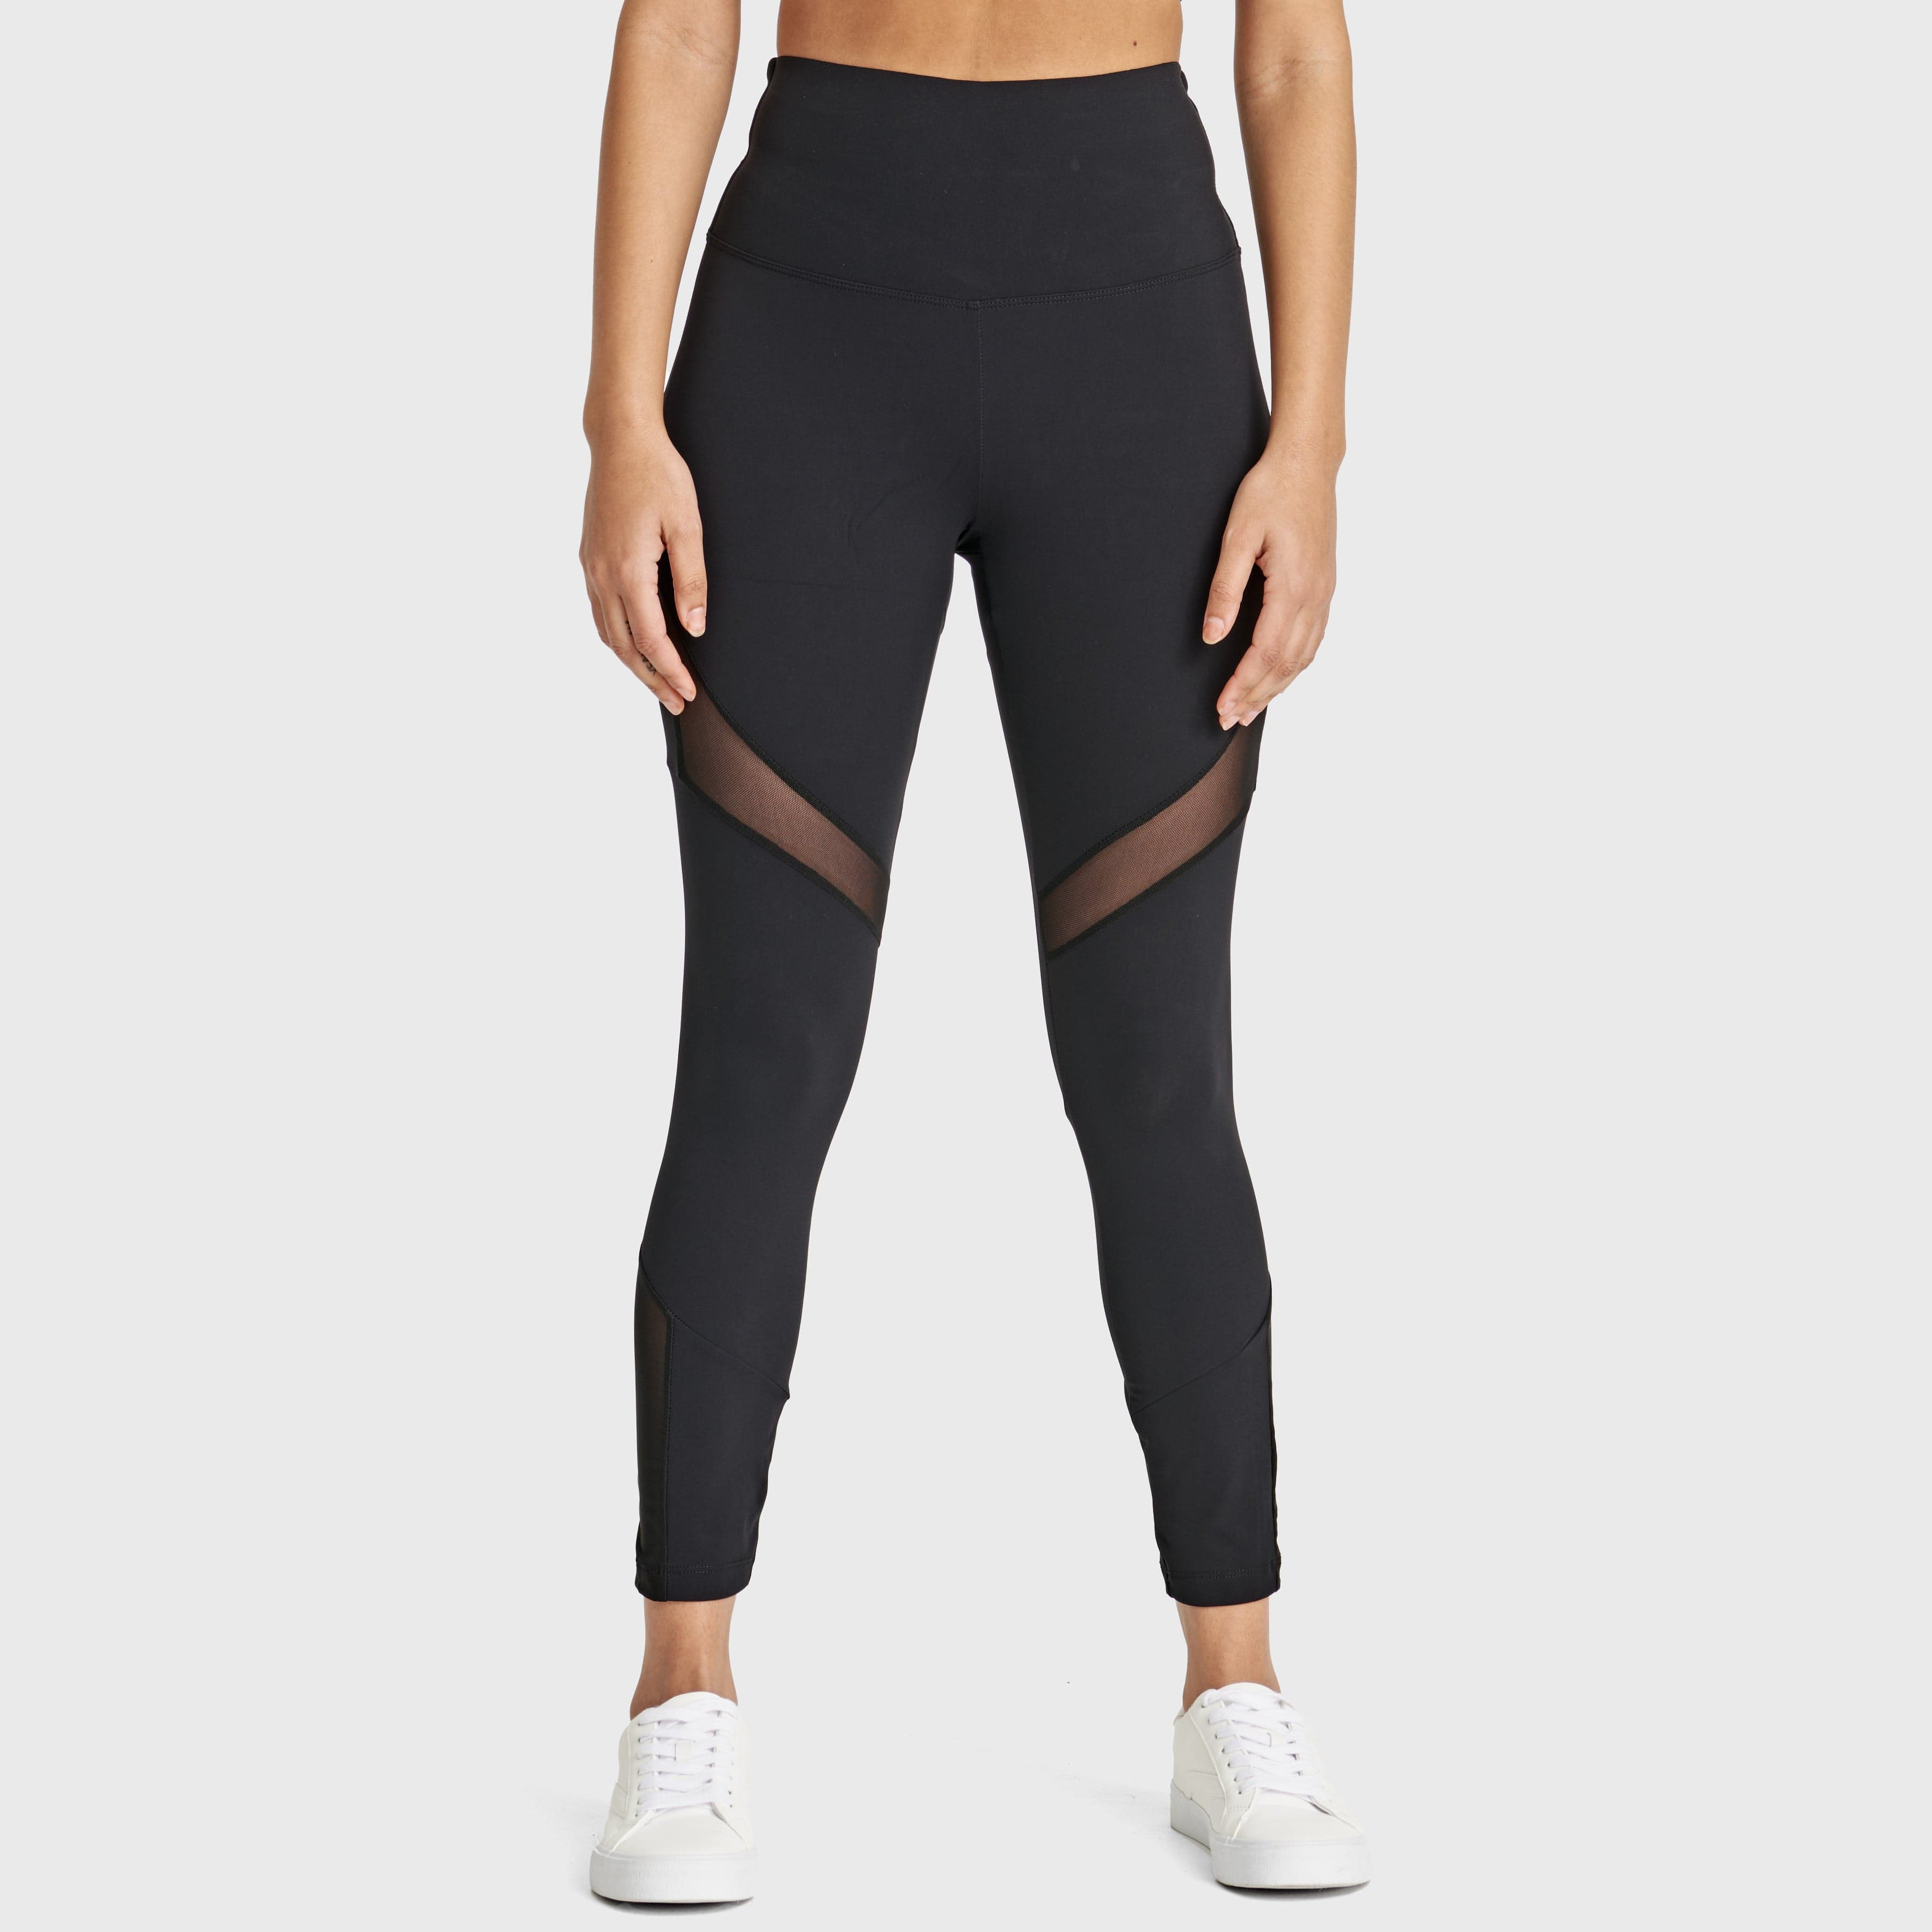 Superfit Diwo Pro With Mesh Detailing - High Waisted - 7/8 Length - Black 2